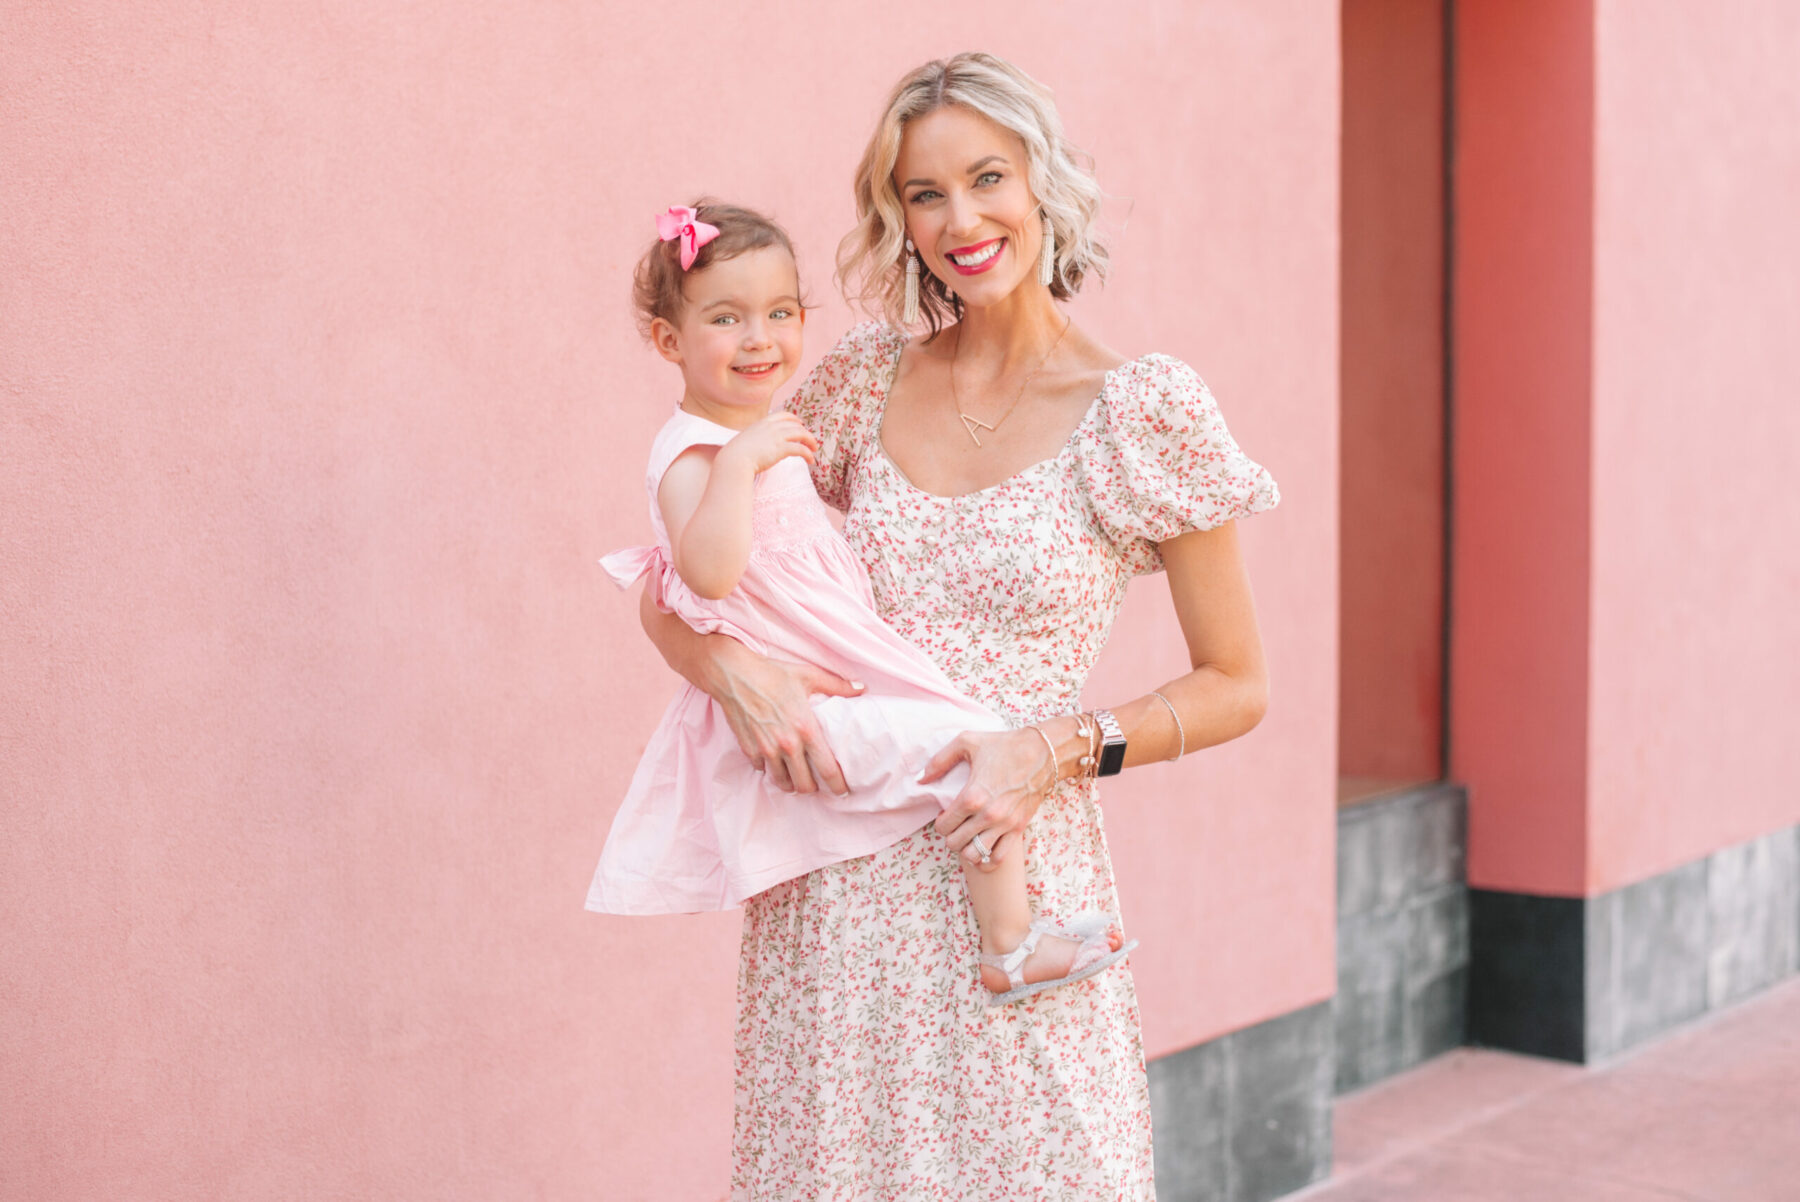 The Best Mommy and Me Outfits to Match With Your Mini! 11 Mother-Daughter  Dresses You'll Both Love! - Praise Wedding